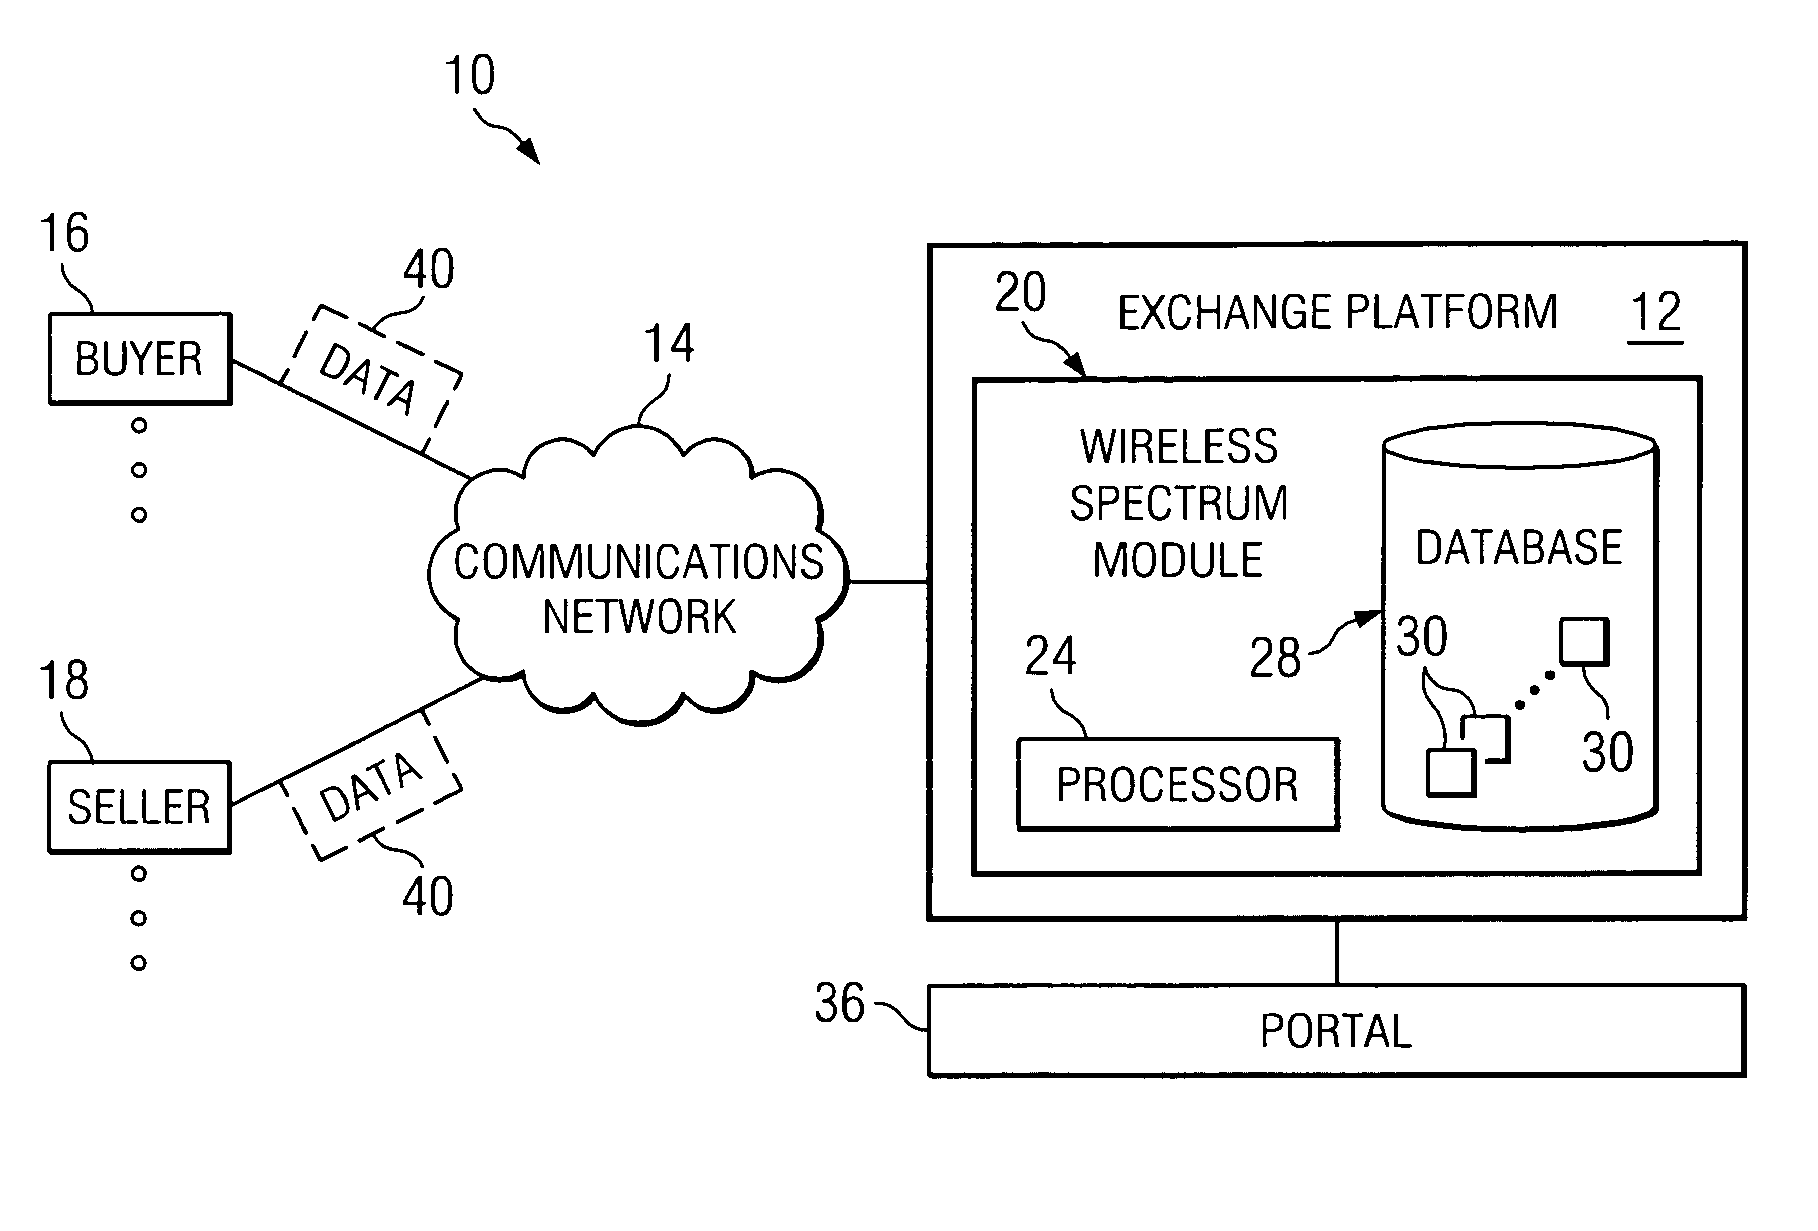 System and method for trading wireless spectrum rights